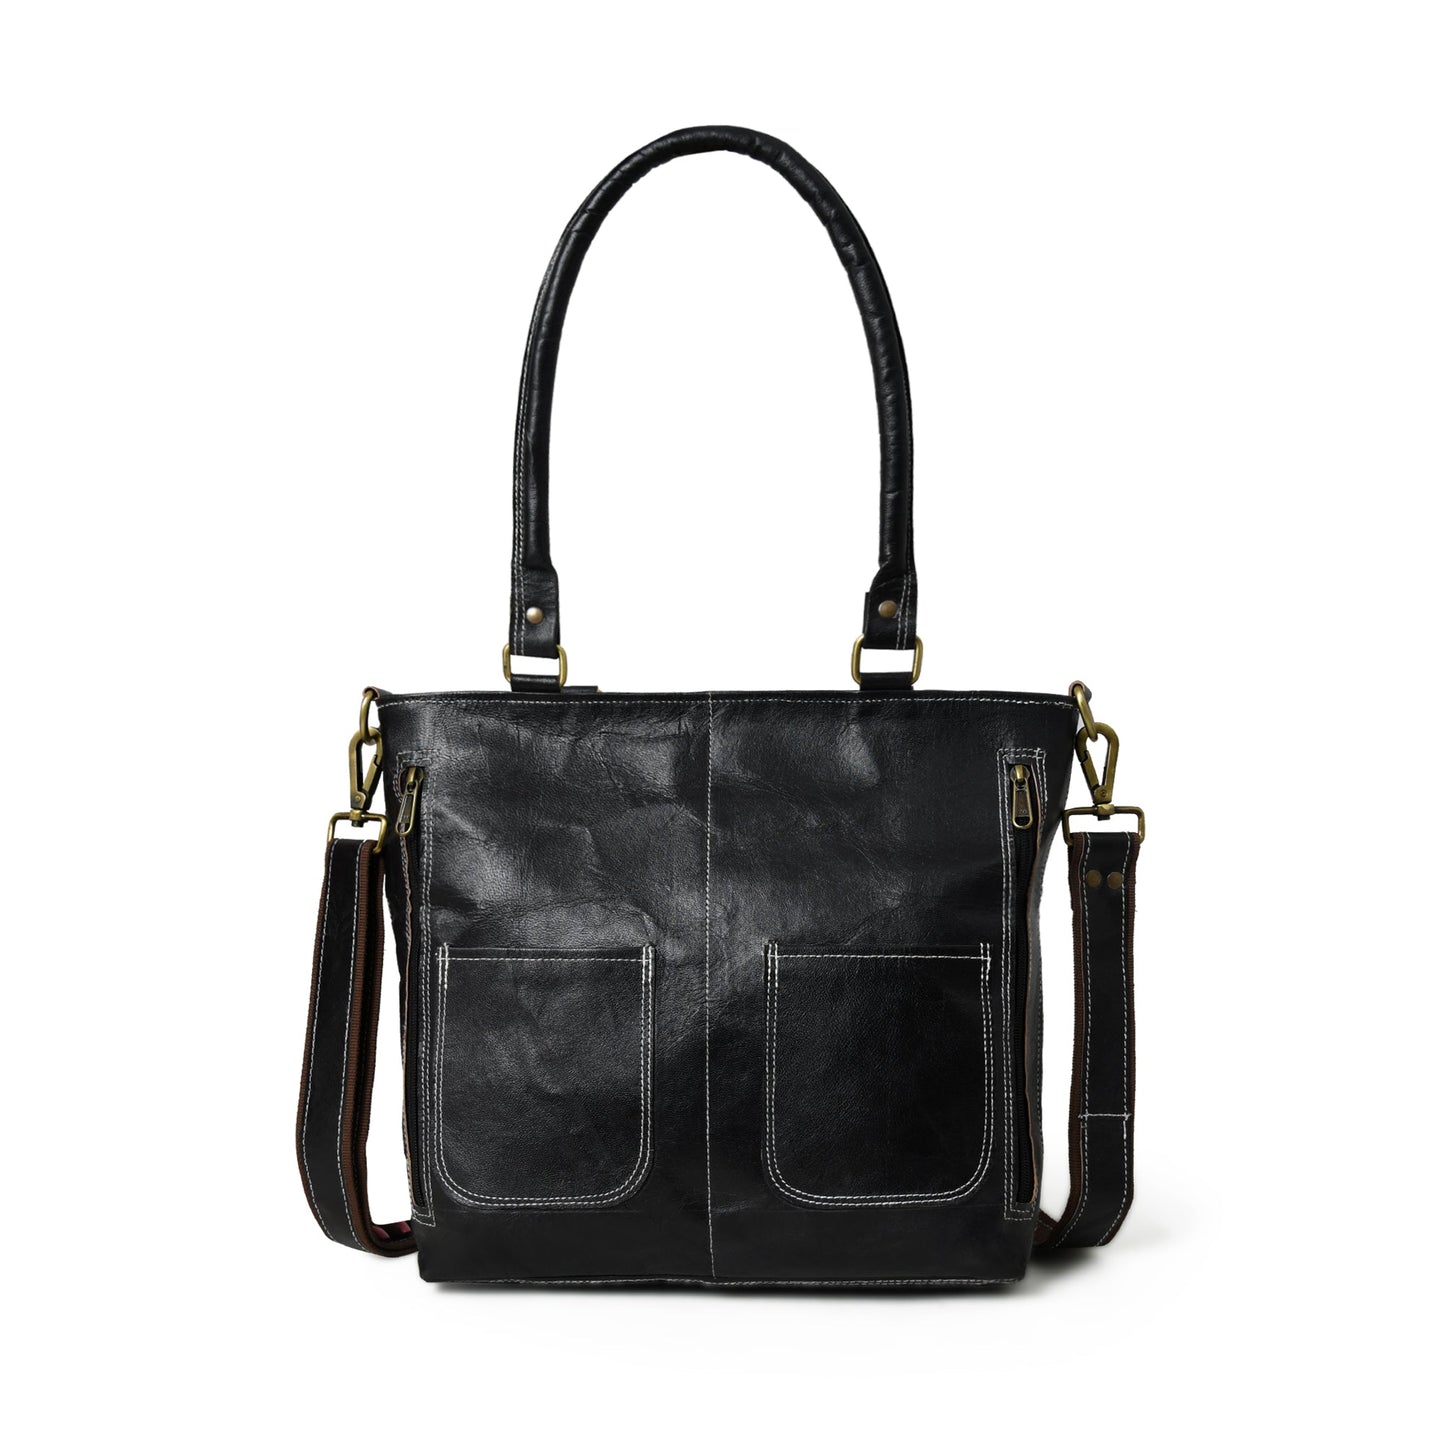 Black Terry Tote - The Tool Store